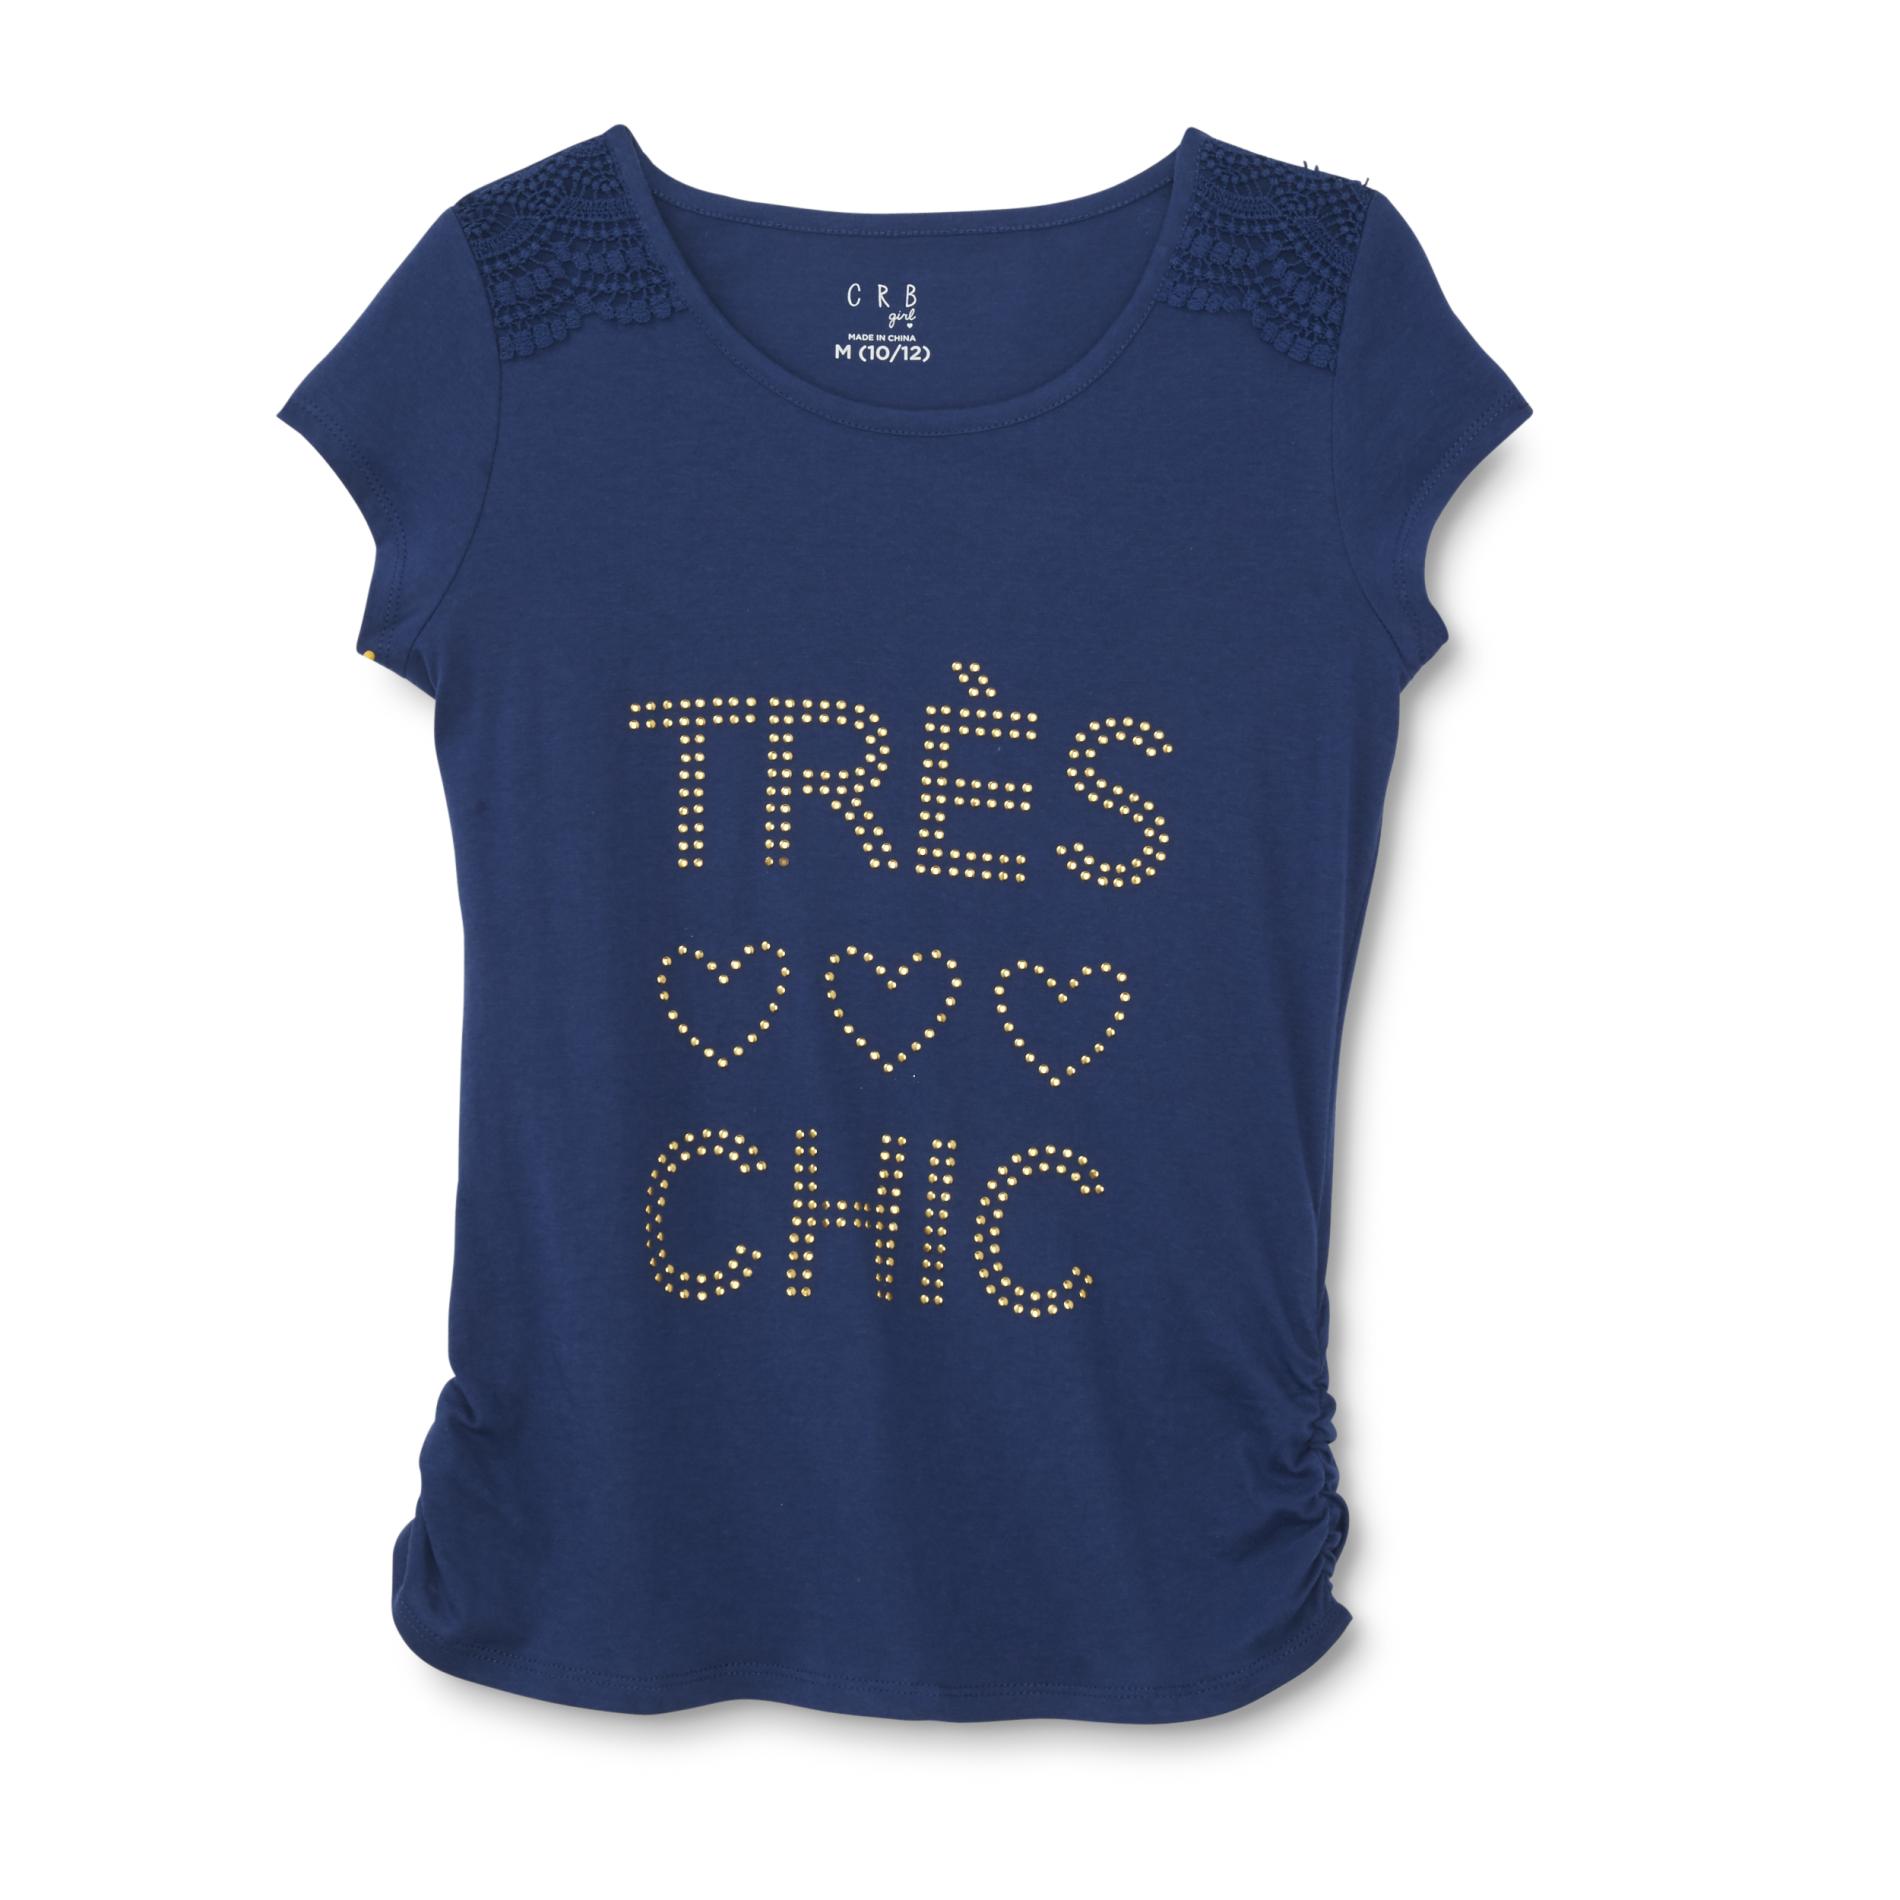 Canyon River Blues Girl's Graphic T-Shirt - Tres Chic